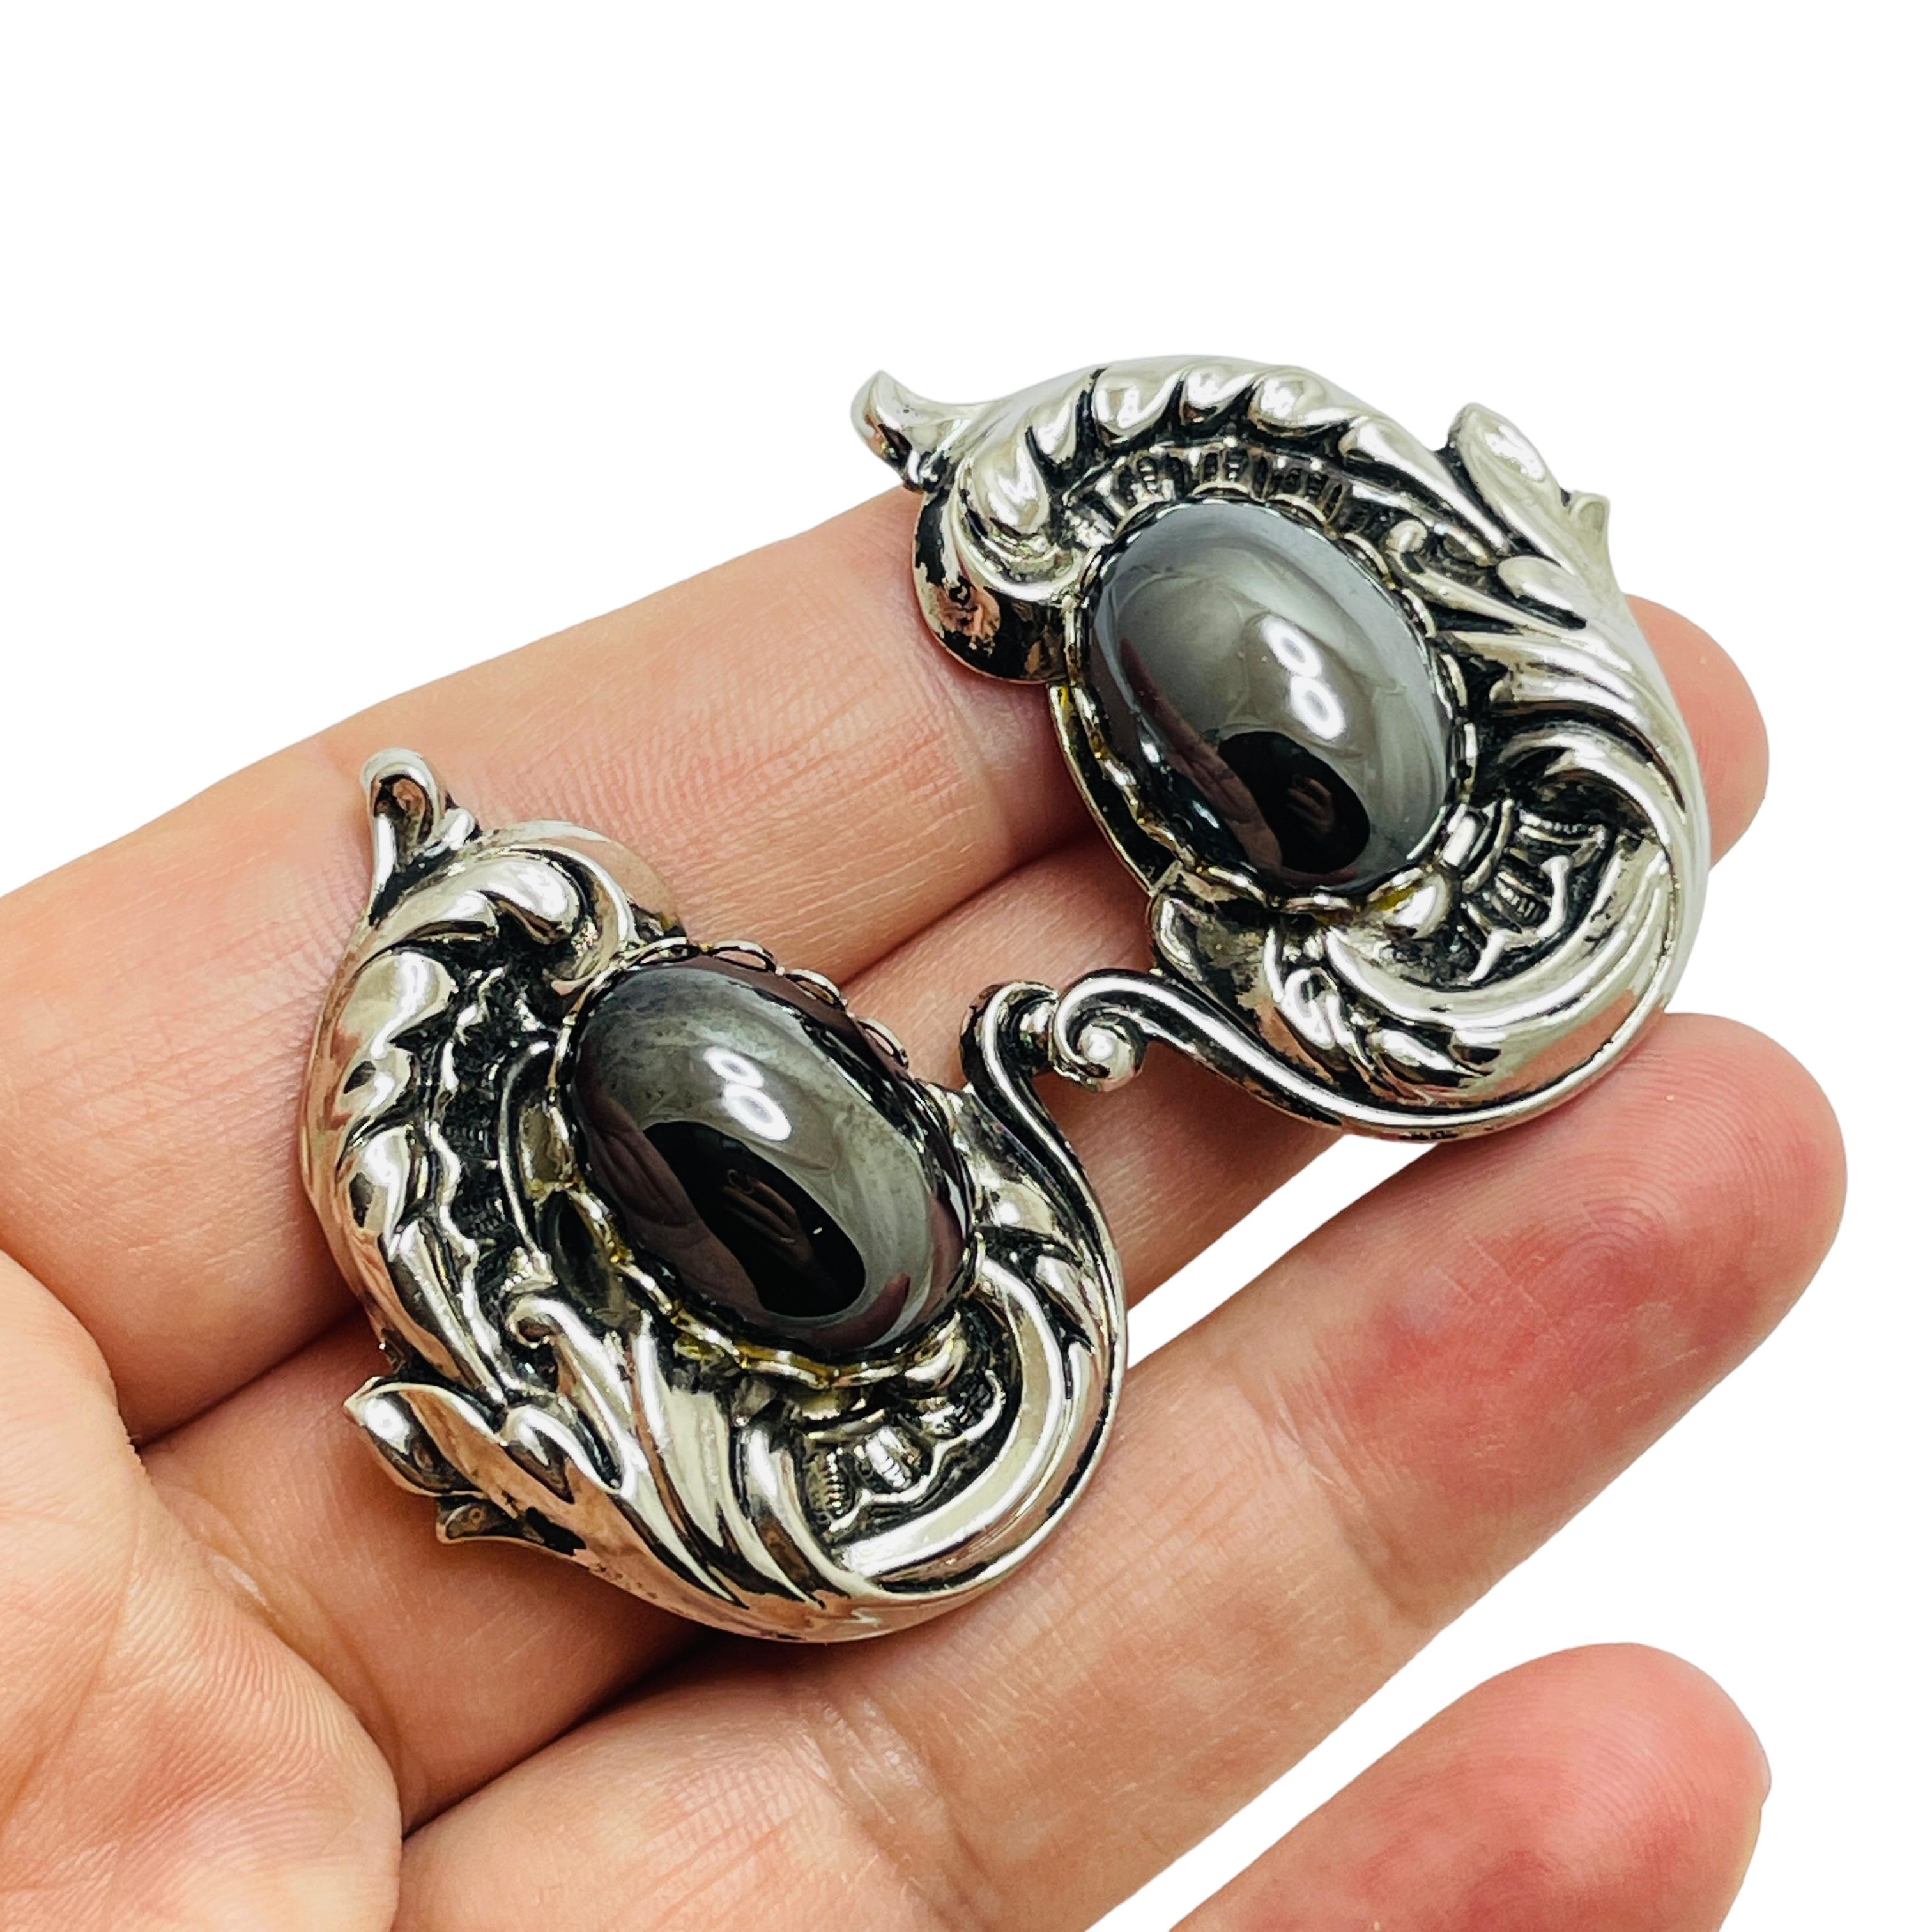 DETAILS

• unsigned

• silver tone 

• vintage designer earrings

MEASUREMENTS

• 

CONDITION

• excellent vintage condition with minimal signs of wear

❤️❤️ VINTAGE DESIGNER JEWELRY ❤️❤️
❤️❤️ ALEXANDER'S BOUTIQUE ❤️❤️